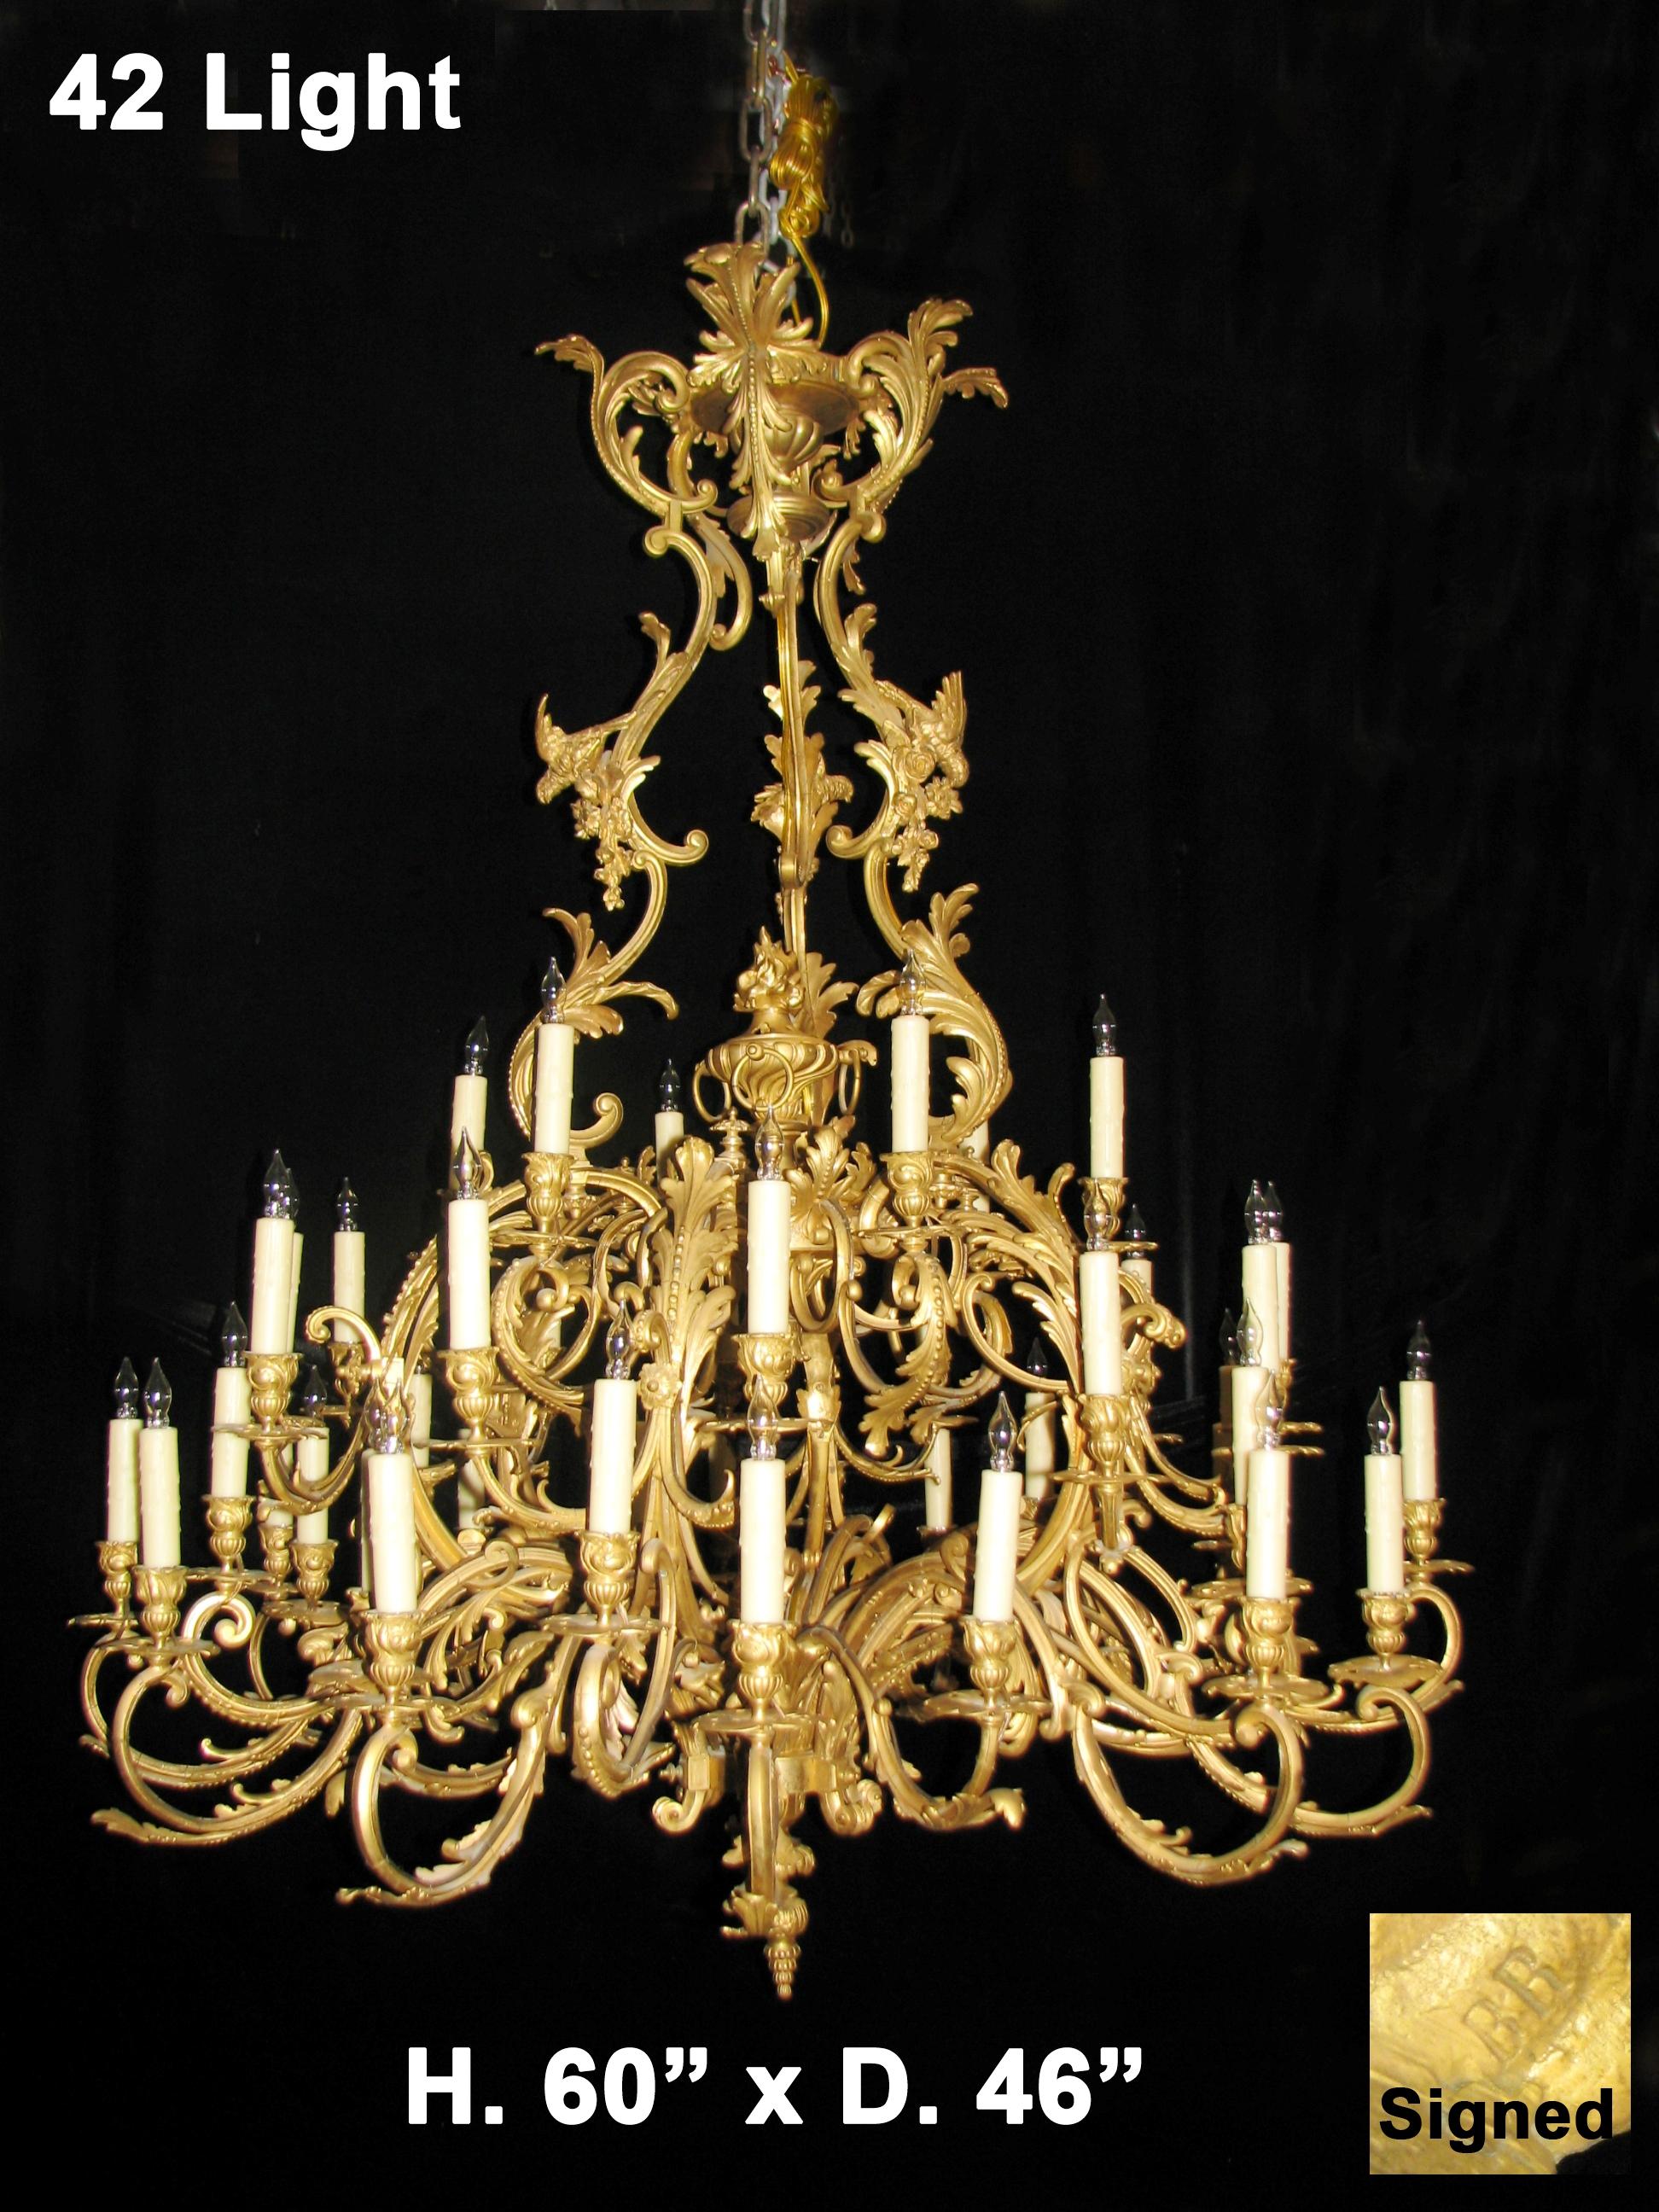 Sensational 19th century French Louis XV style doré bronze two-tier 42-light chandelier with birds. 
Signed BR. 
The exquisite doré bronze chandelier is surmounted in an ormolu acanthus crown, conjoined with double-scroll and foliate motif